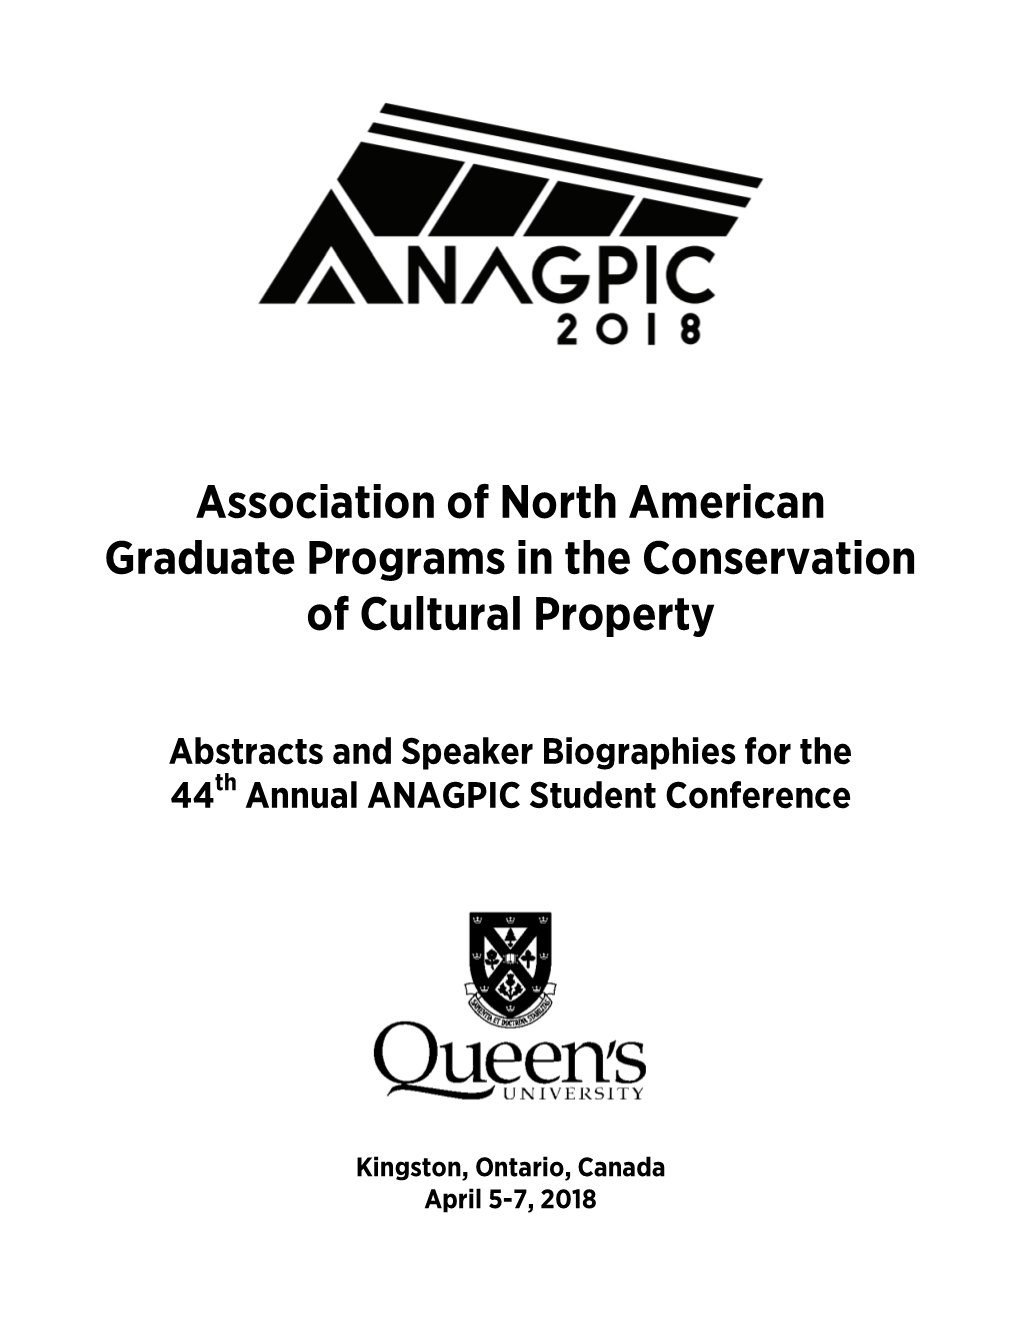 Association of North American Graduate Programs in the Conservation of Cultural Property